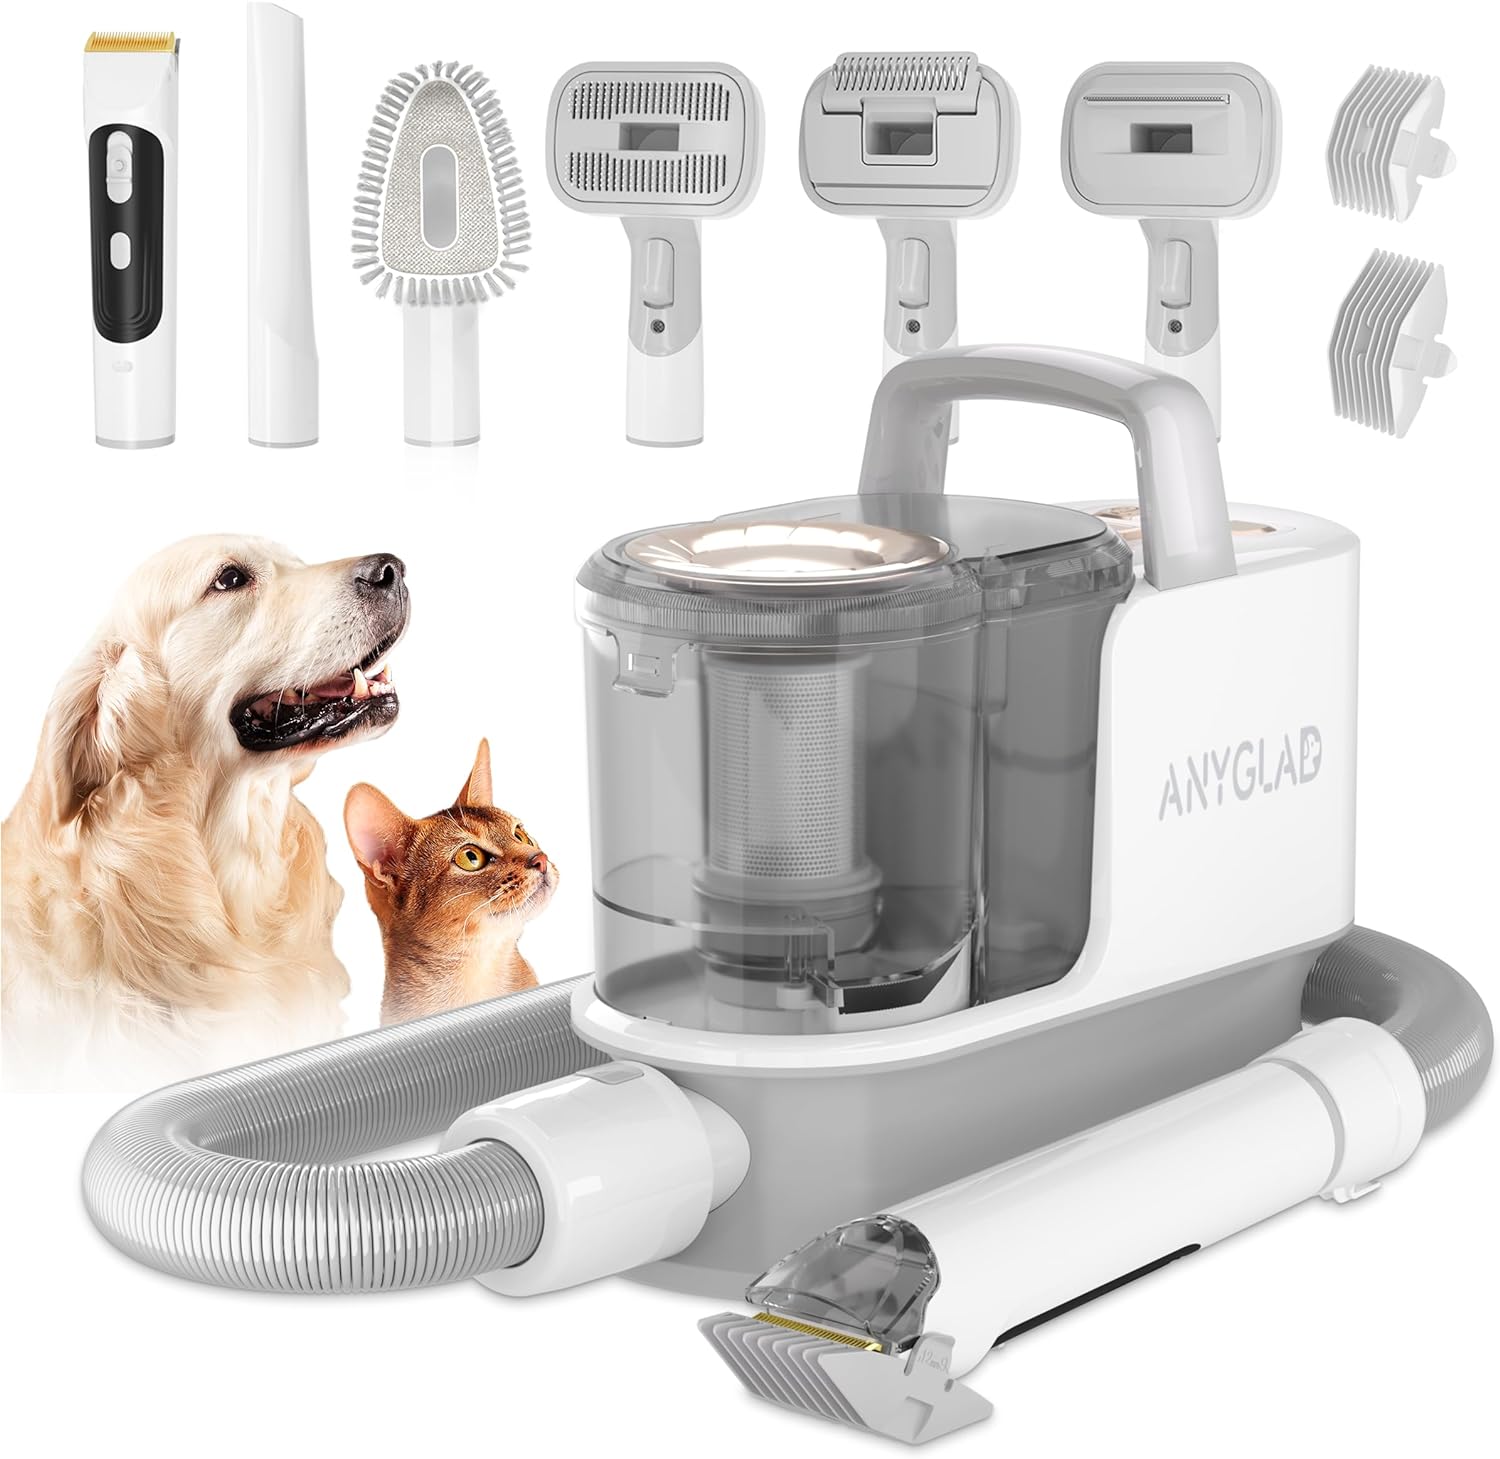 You are currently viewing Anyglad Low Noise Dog Grooming Kit Review